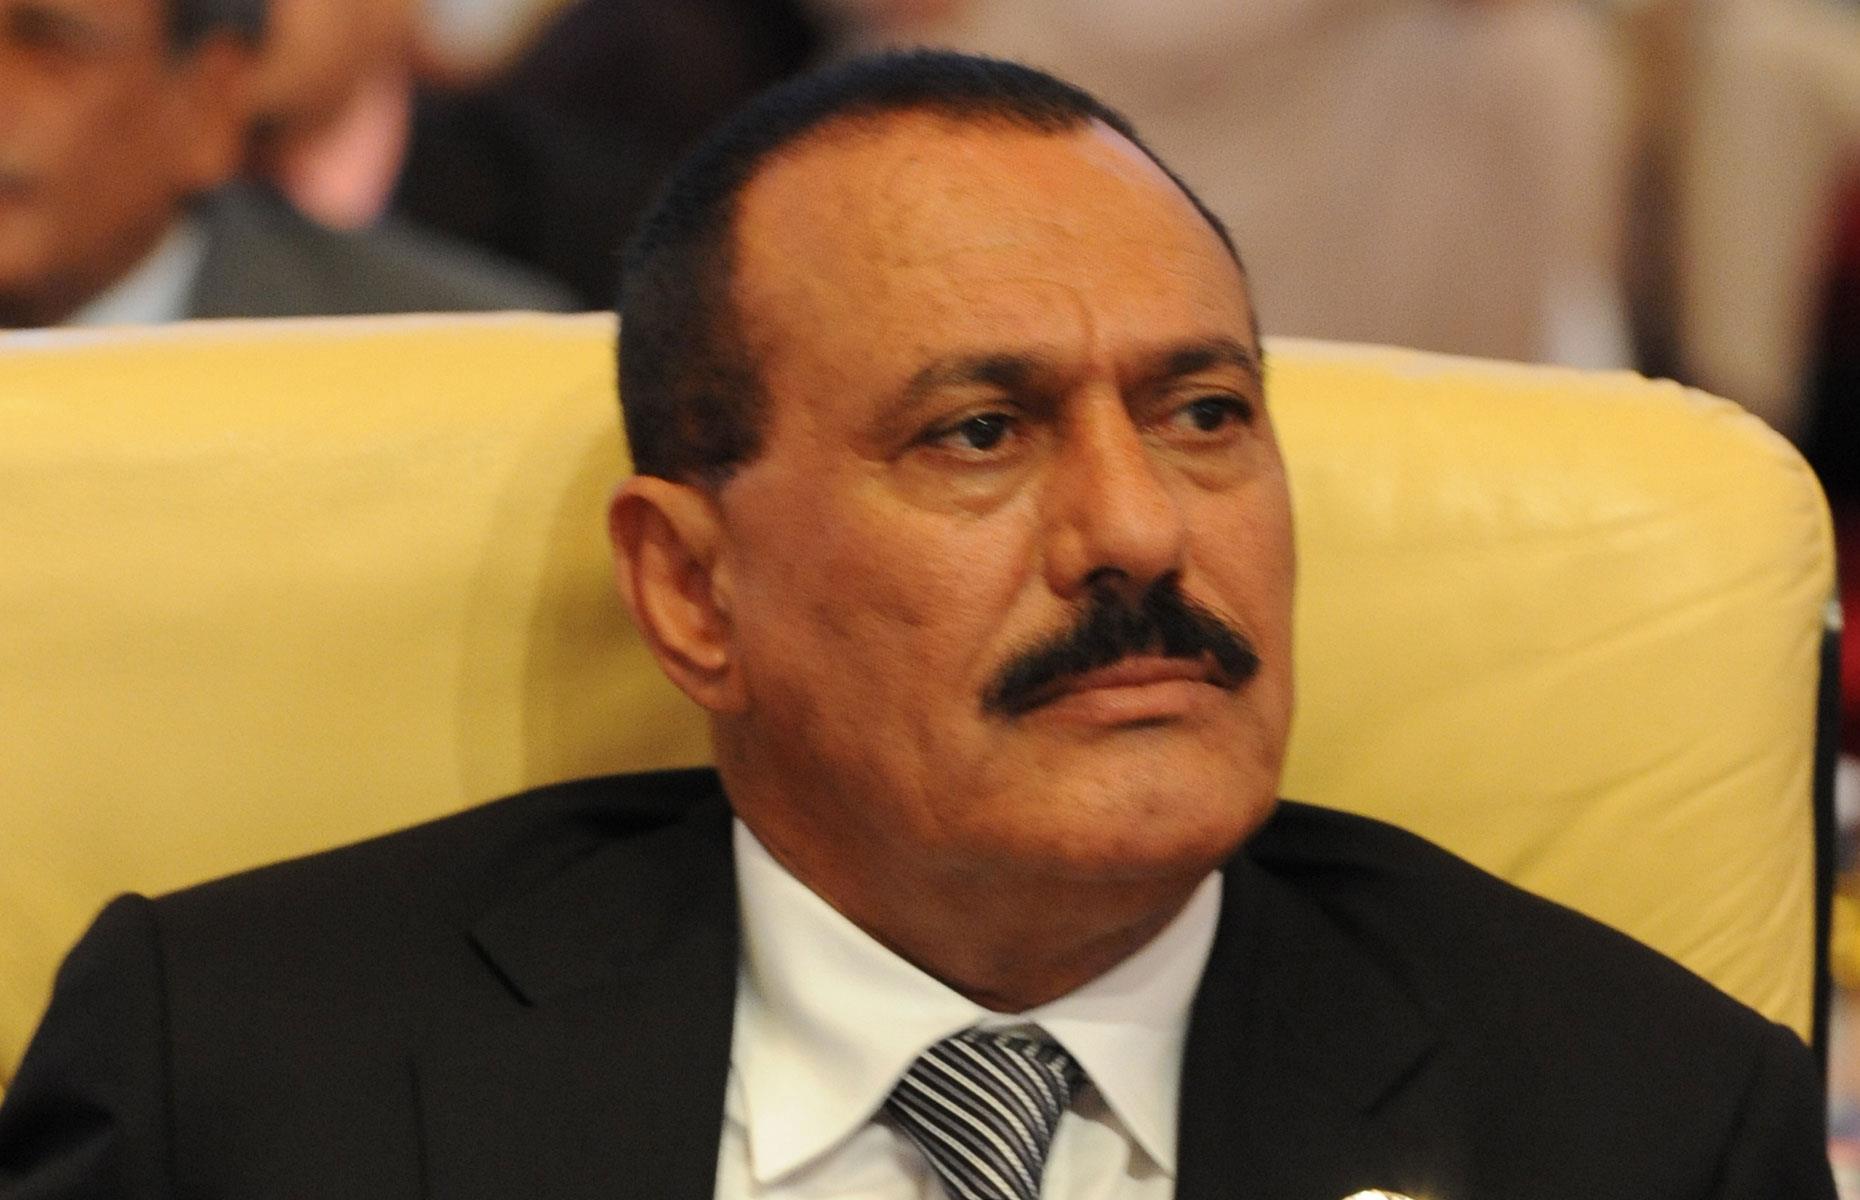 <p>The president of Yemen from 1990 to 2012 was as corrupt as they come. Saleh was accused of stealing incredible sums of money from the Yemeni people before his ousting following the Arab Spring series of protests. In fact, a report presented to the United Nations Security Council in 2015 pegged his net worth at up to $64 billion.</p>